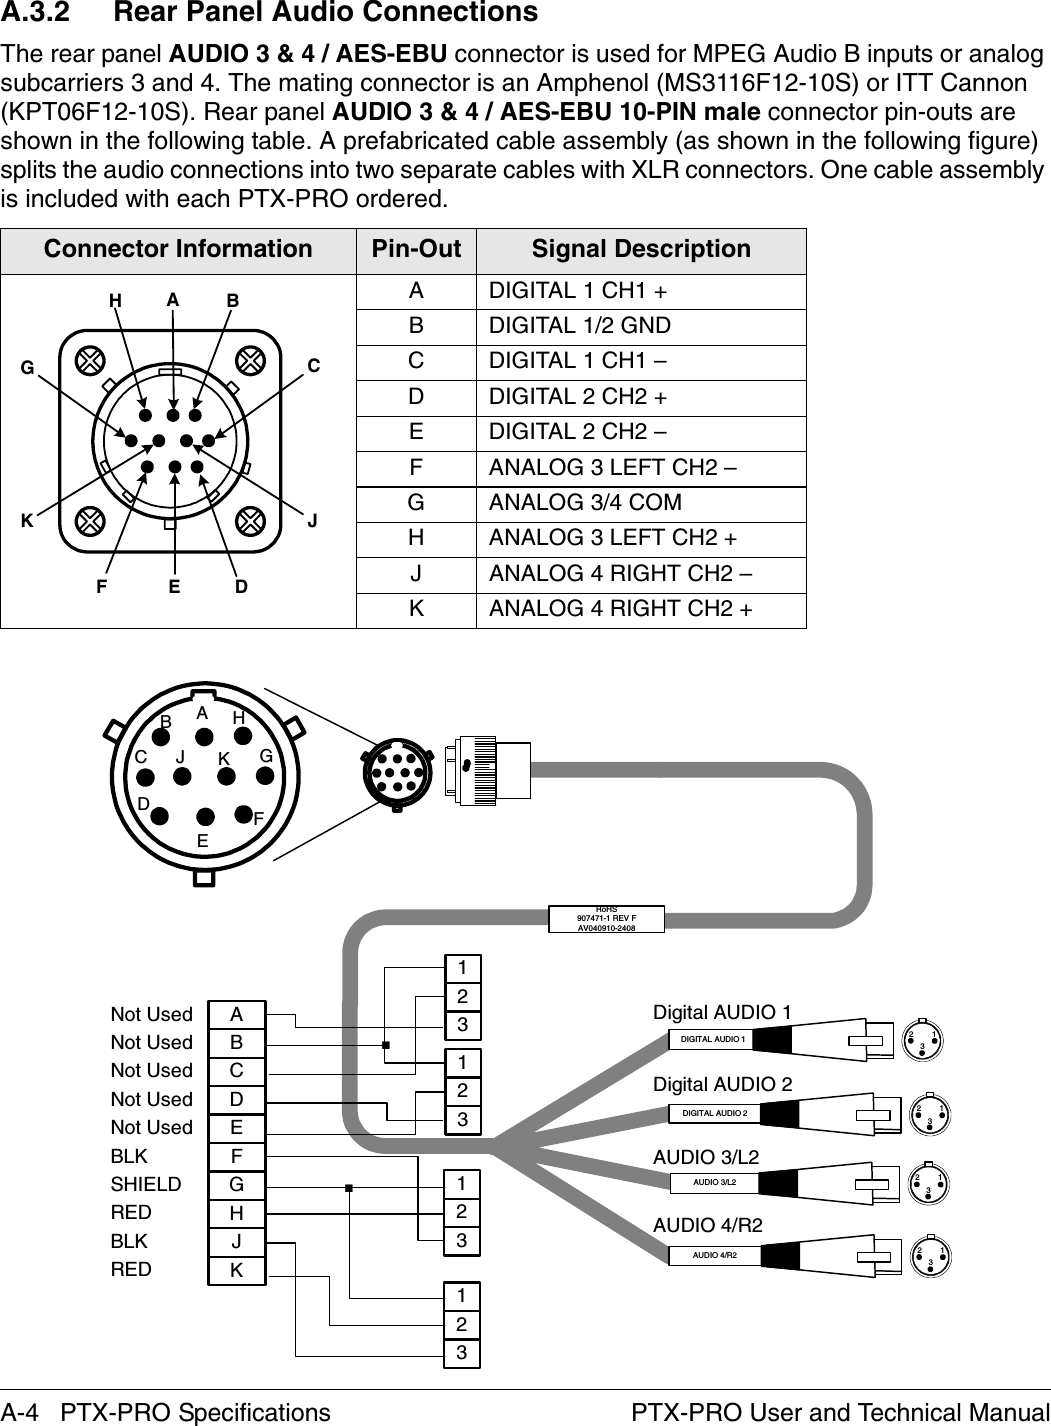 A-4   PTX-PRO Specifications PTX-PRO User and Technical ManualA.3.2 Rear Panel Audio ConnectionsThe rear panel AUDIO 3 &amp; 4 / AES-EBU connector is used for MPEG Audio B inputs or analog subcarriers 3 and 4. The mating connector is an Amphenol (MS3116F12-10S) or ITT Cannon (KPT06F12-10S). Rear panel AUDIO 3 &amp; 4 / AES-EBU 10-PIN male connector pin-outs are shown in the following table. A prefabricated cable assembly (as shown in the following figure) splits the audio connections into two separate cables with XLR connectors. One cable assembly is included with each PTX-PRO ordered.  Connector Information  Pin-Out Signal DescriptionA DIGITAL 1 CH1 +B DIGITAL 1/2 GNDC DIGITAL 1 CH1 –D DIGITAL 2 CH2 +E DIGITAL 2 CH2 –F ANALOG 3 LEFT CH2 –G ANALOG 3/4 COMH ANALOG 3 LEFT CH2 +J ANALOG 4 RIGHT CH2 –K ANALOG 4 RIGHT CH2 +ABCDEFGHJKRoHS907471-1 REV FAV040910-2408123123EABCDGHJKFNot UsedNot UsedNot UsedBLKSHIELDREDBLKREDNot UsedNot UsedDigital AUDIO 1Digital AUDIO 2.ABCDEFGHJKDIGITAL AUDIO 1DIGITAL AUDIO 2AUDIO 3/L2AUDIO 4/R2AUDIO 3/L2AUDIO 4/R2123123.123123123123